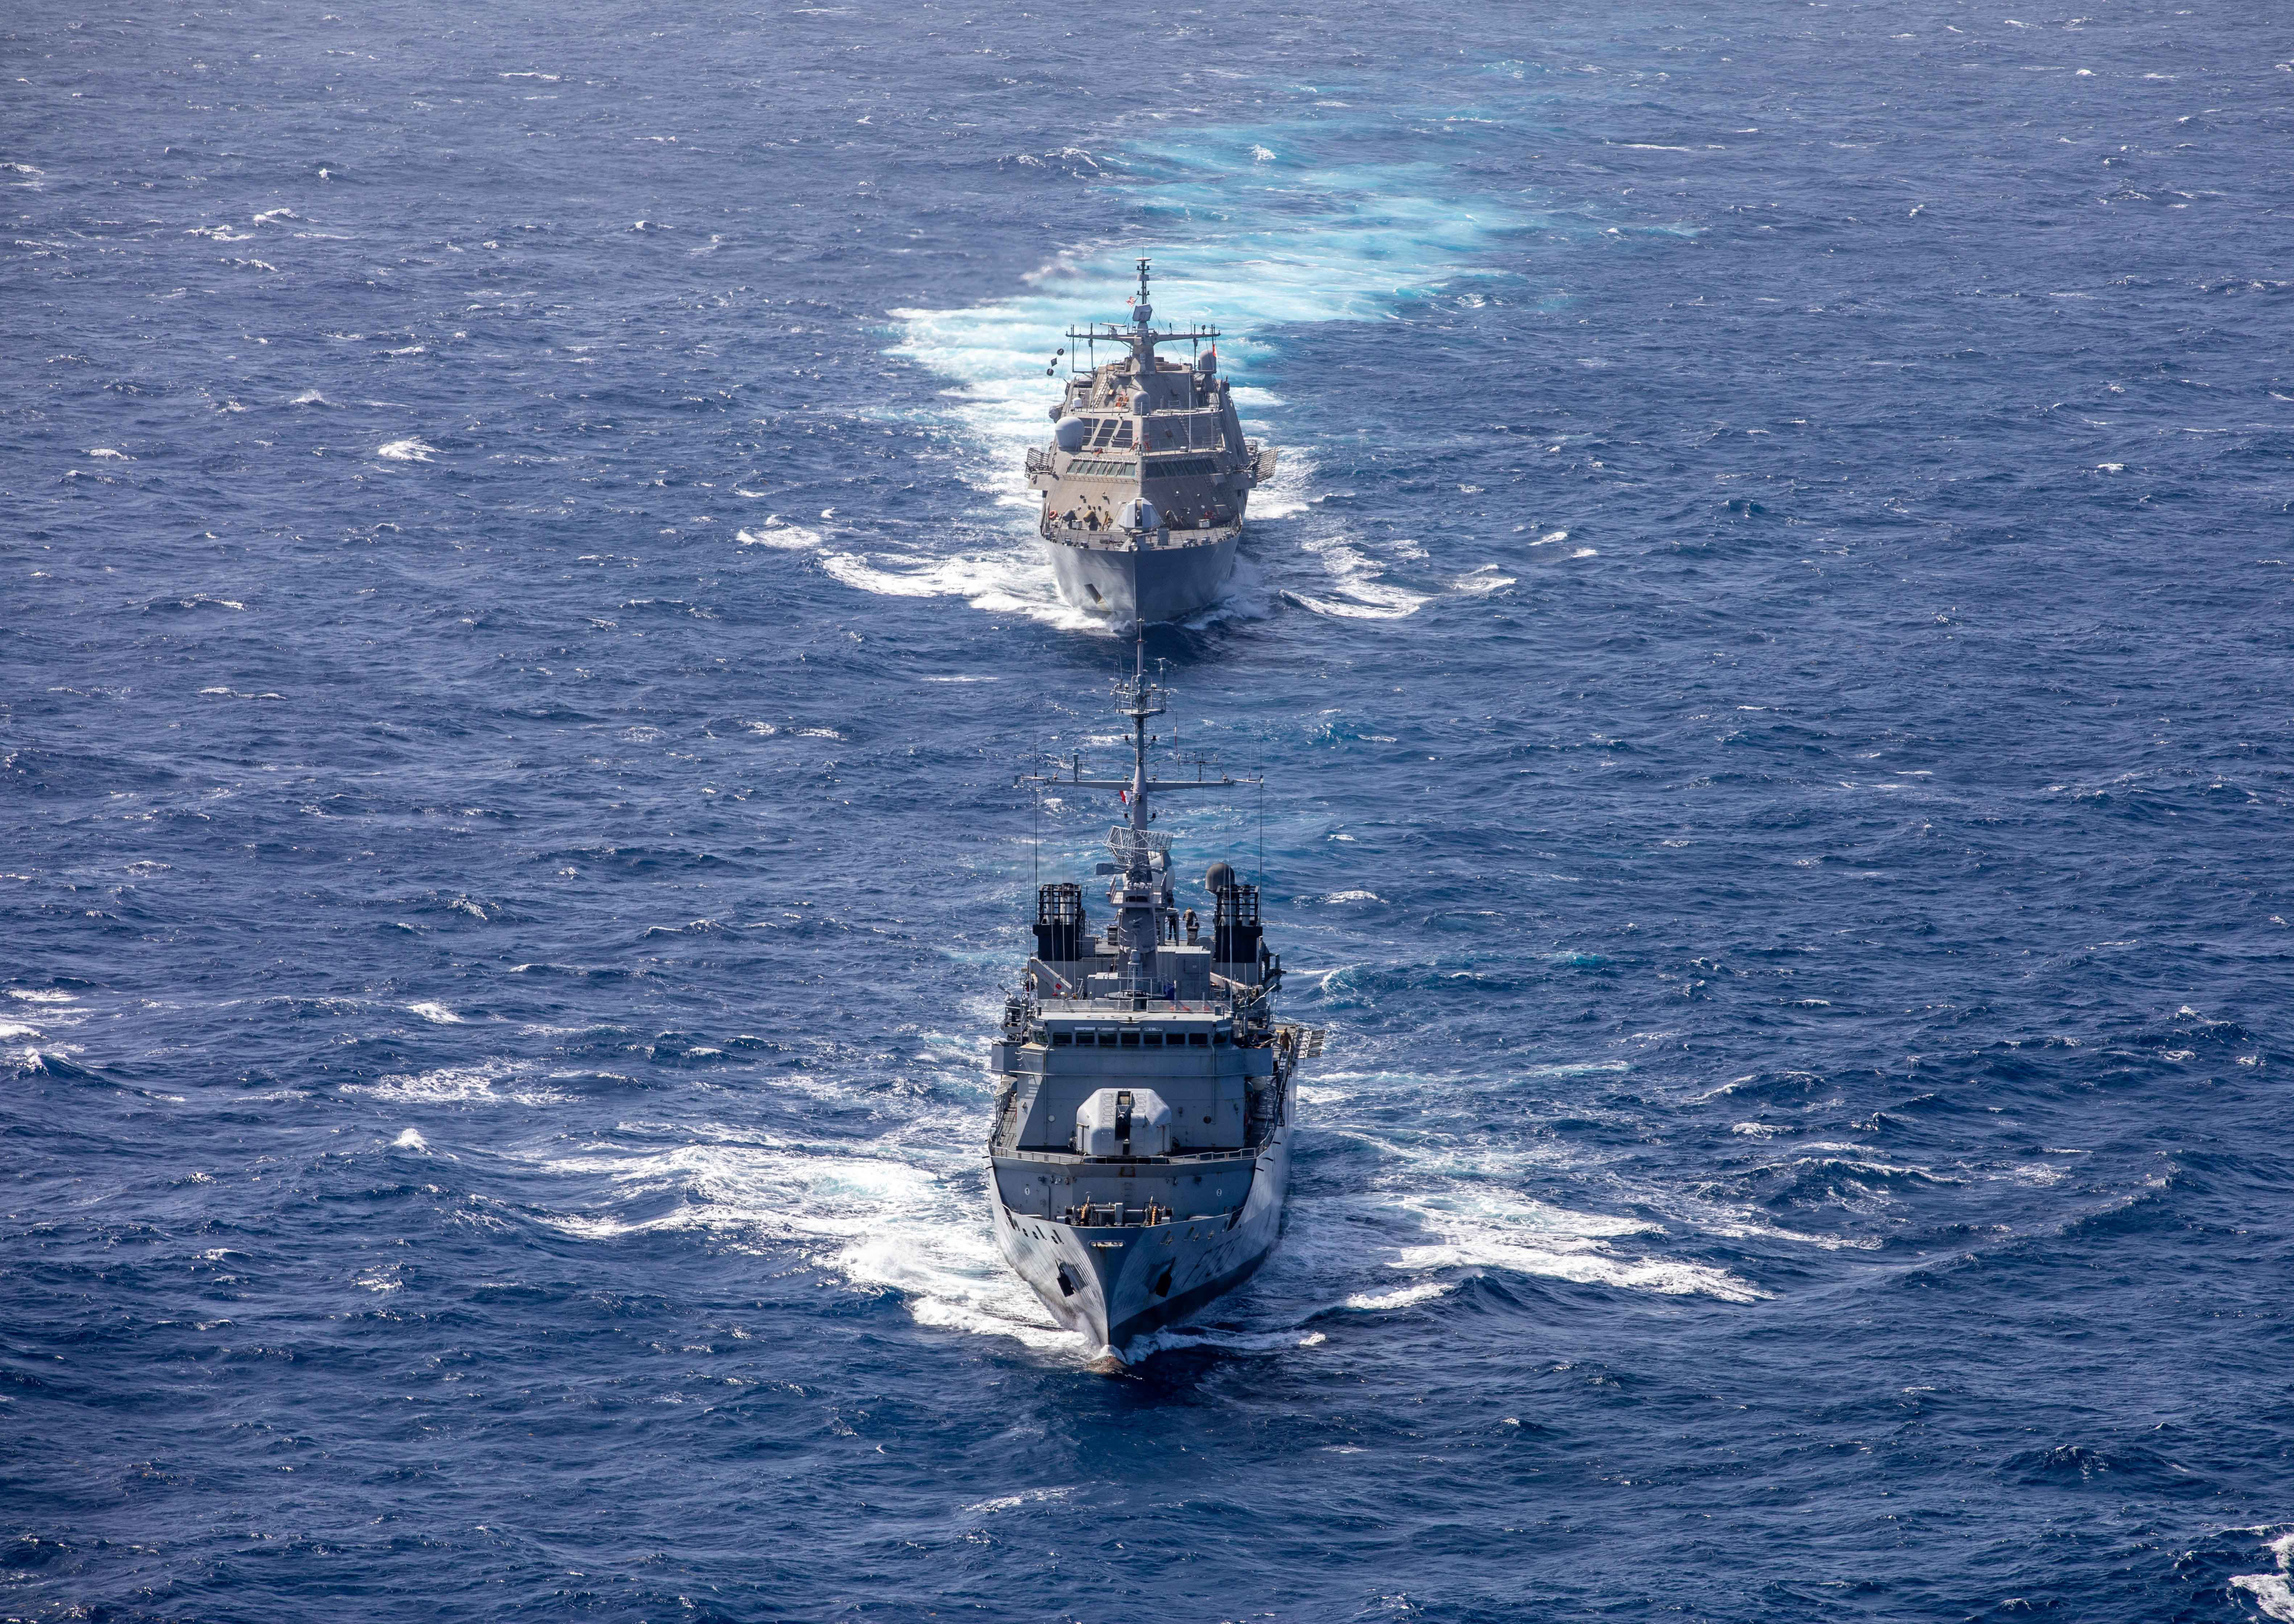 The French navy  Floreal-class frigate FS Germinal (F735) and the Freedom-variant littoral combat ship USS Milwaukee (LCS 5) conduct a bilateral maritime exercise in the Caribbean Sea.